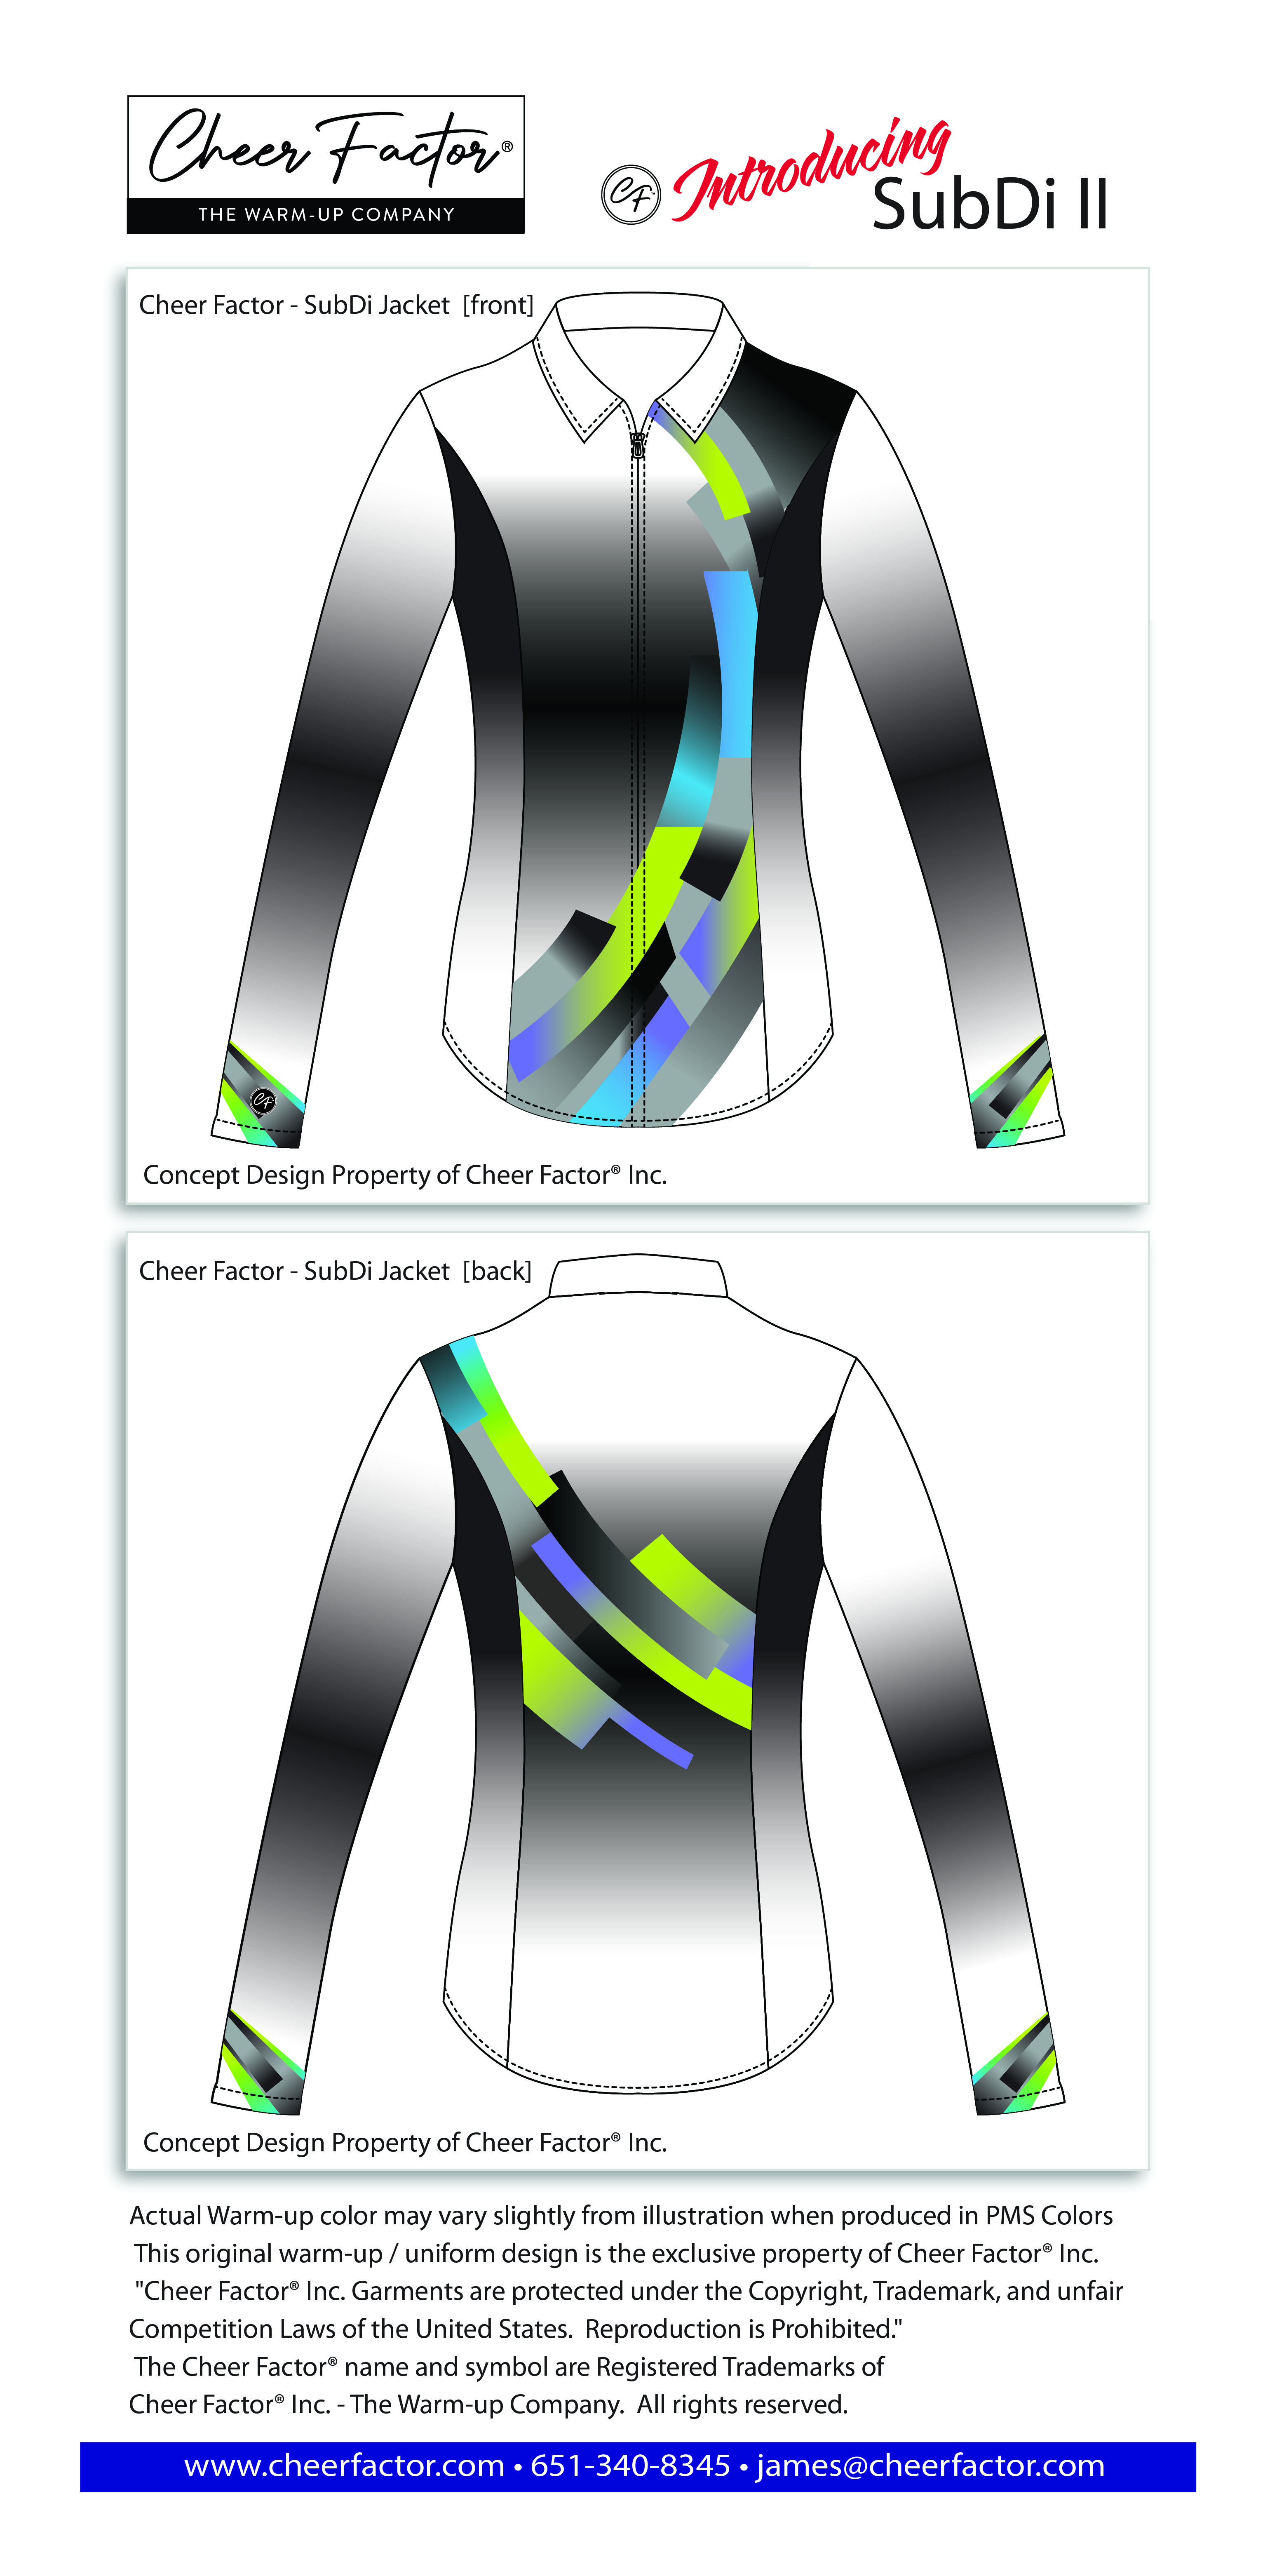 Waterfall Series a Budget-friendly designed Performance Warm-up shown in white, lime, black, teal, and bright blue.